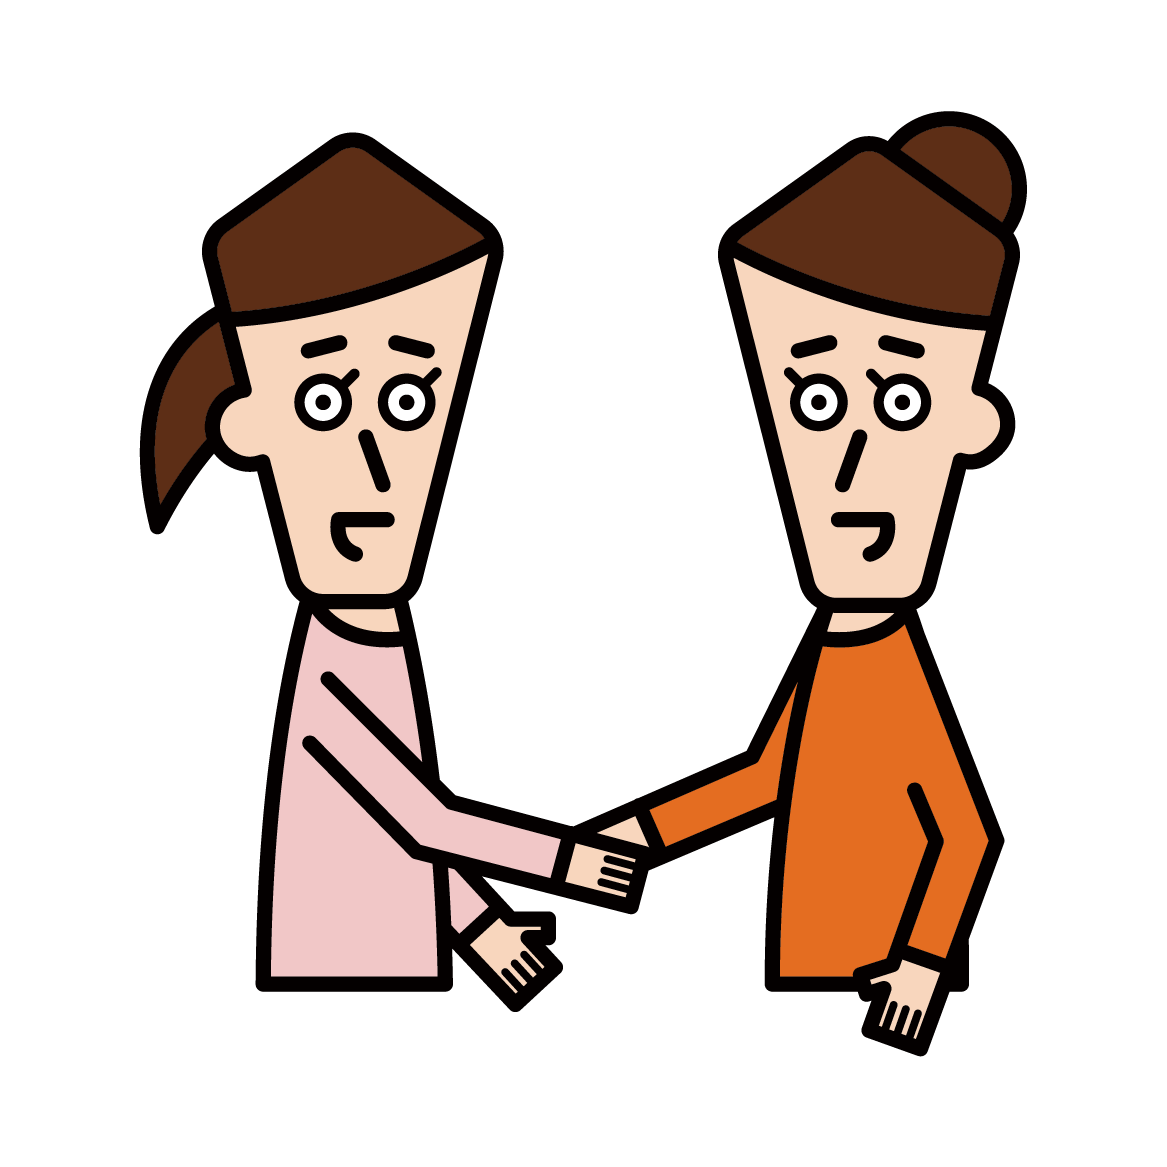 Illustration of a person shaking hands and trusting relationship (female)